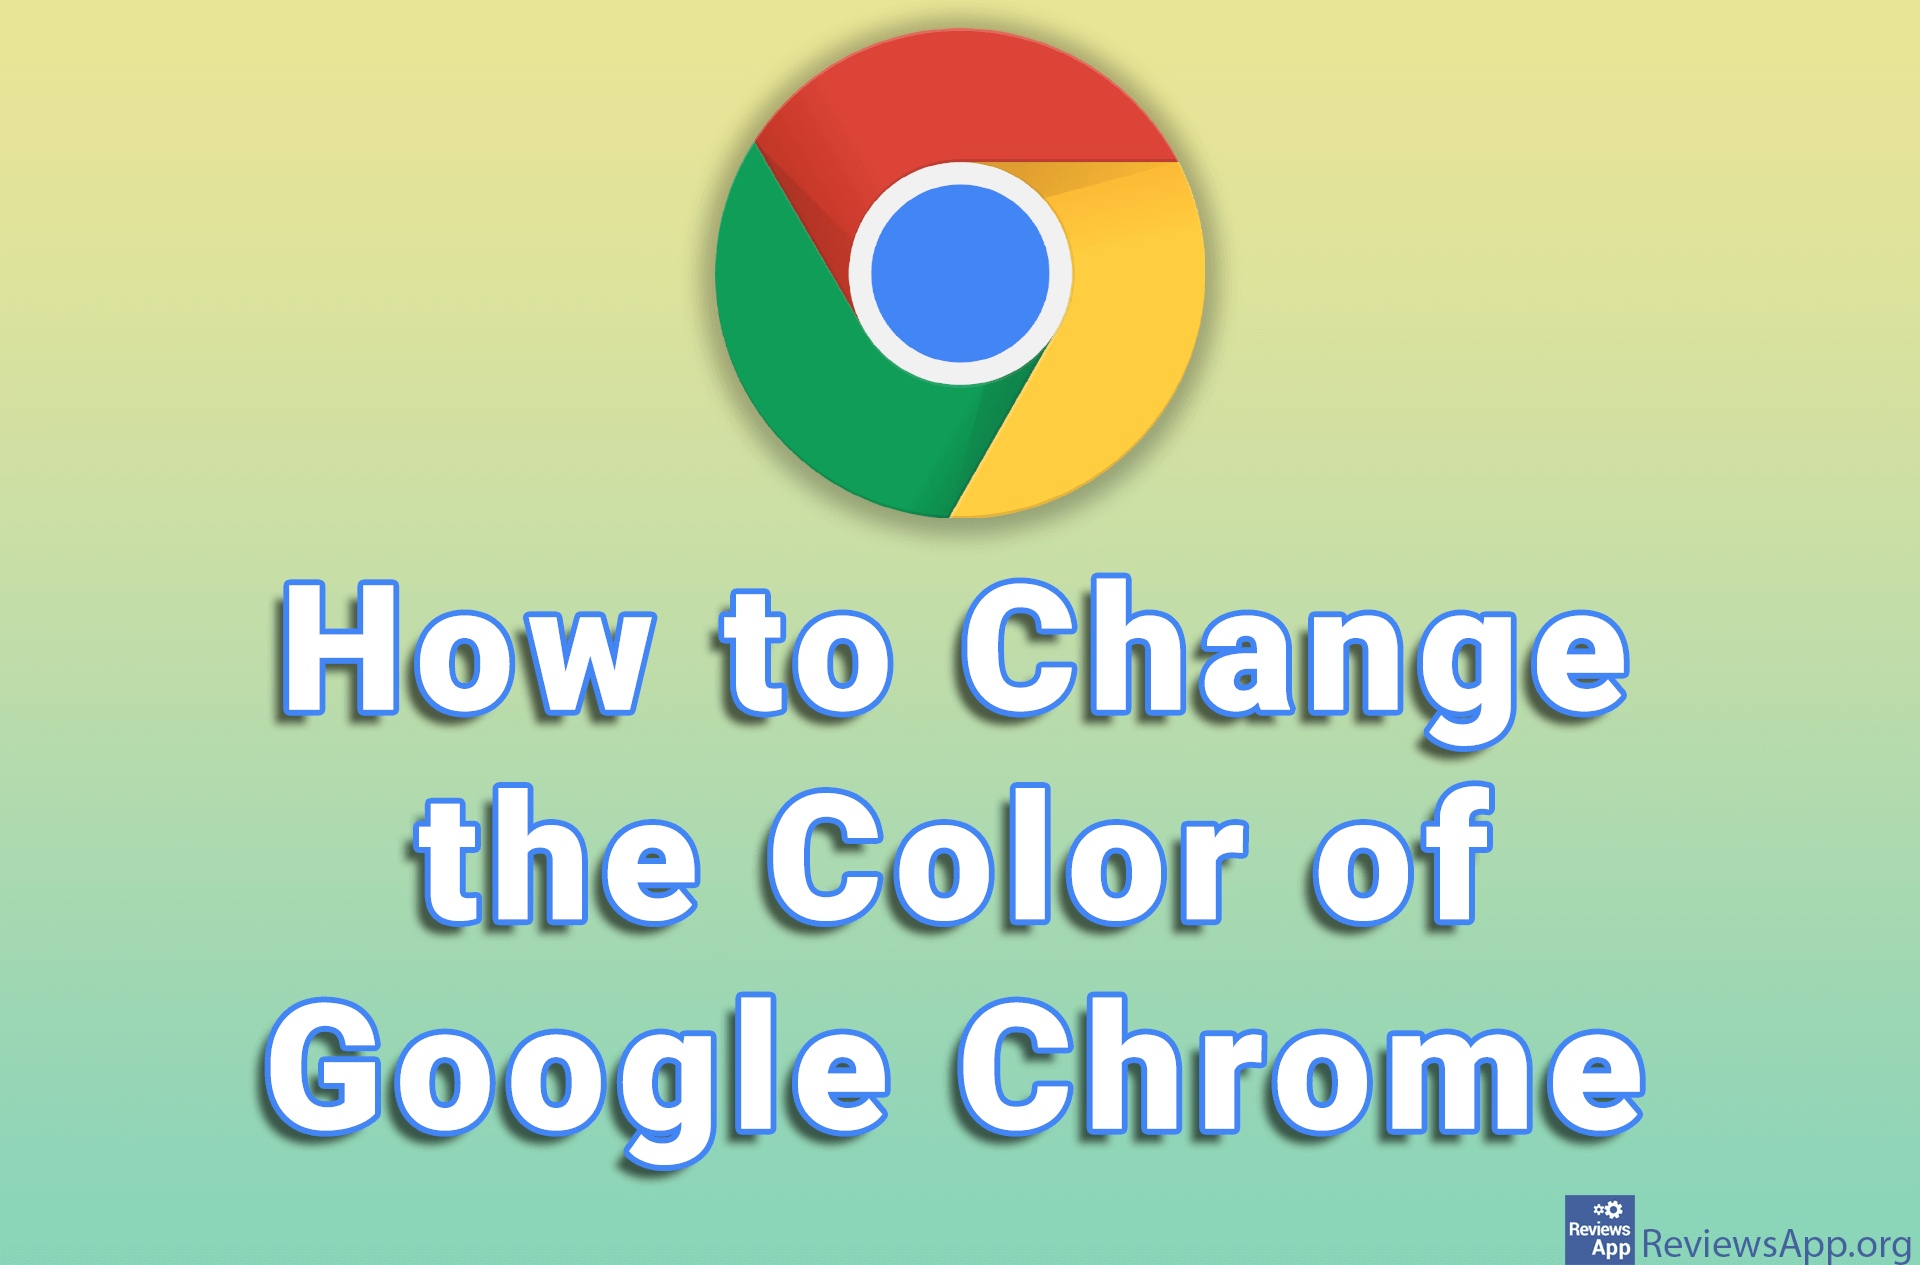 How to Change the Color of Google Chrome